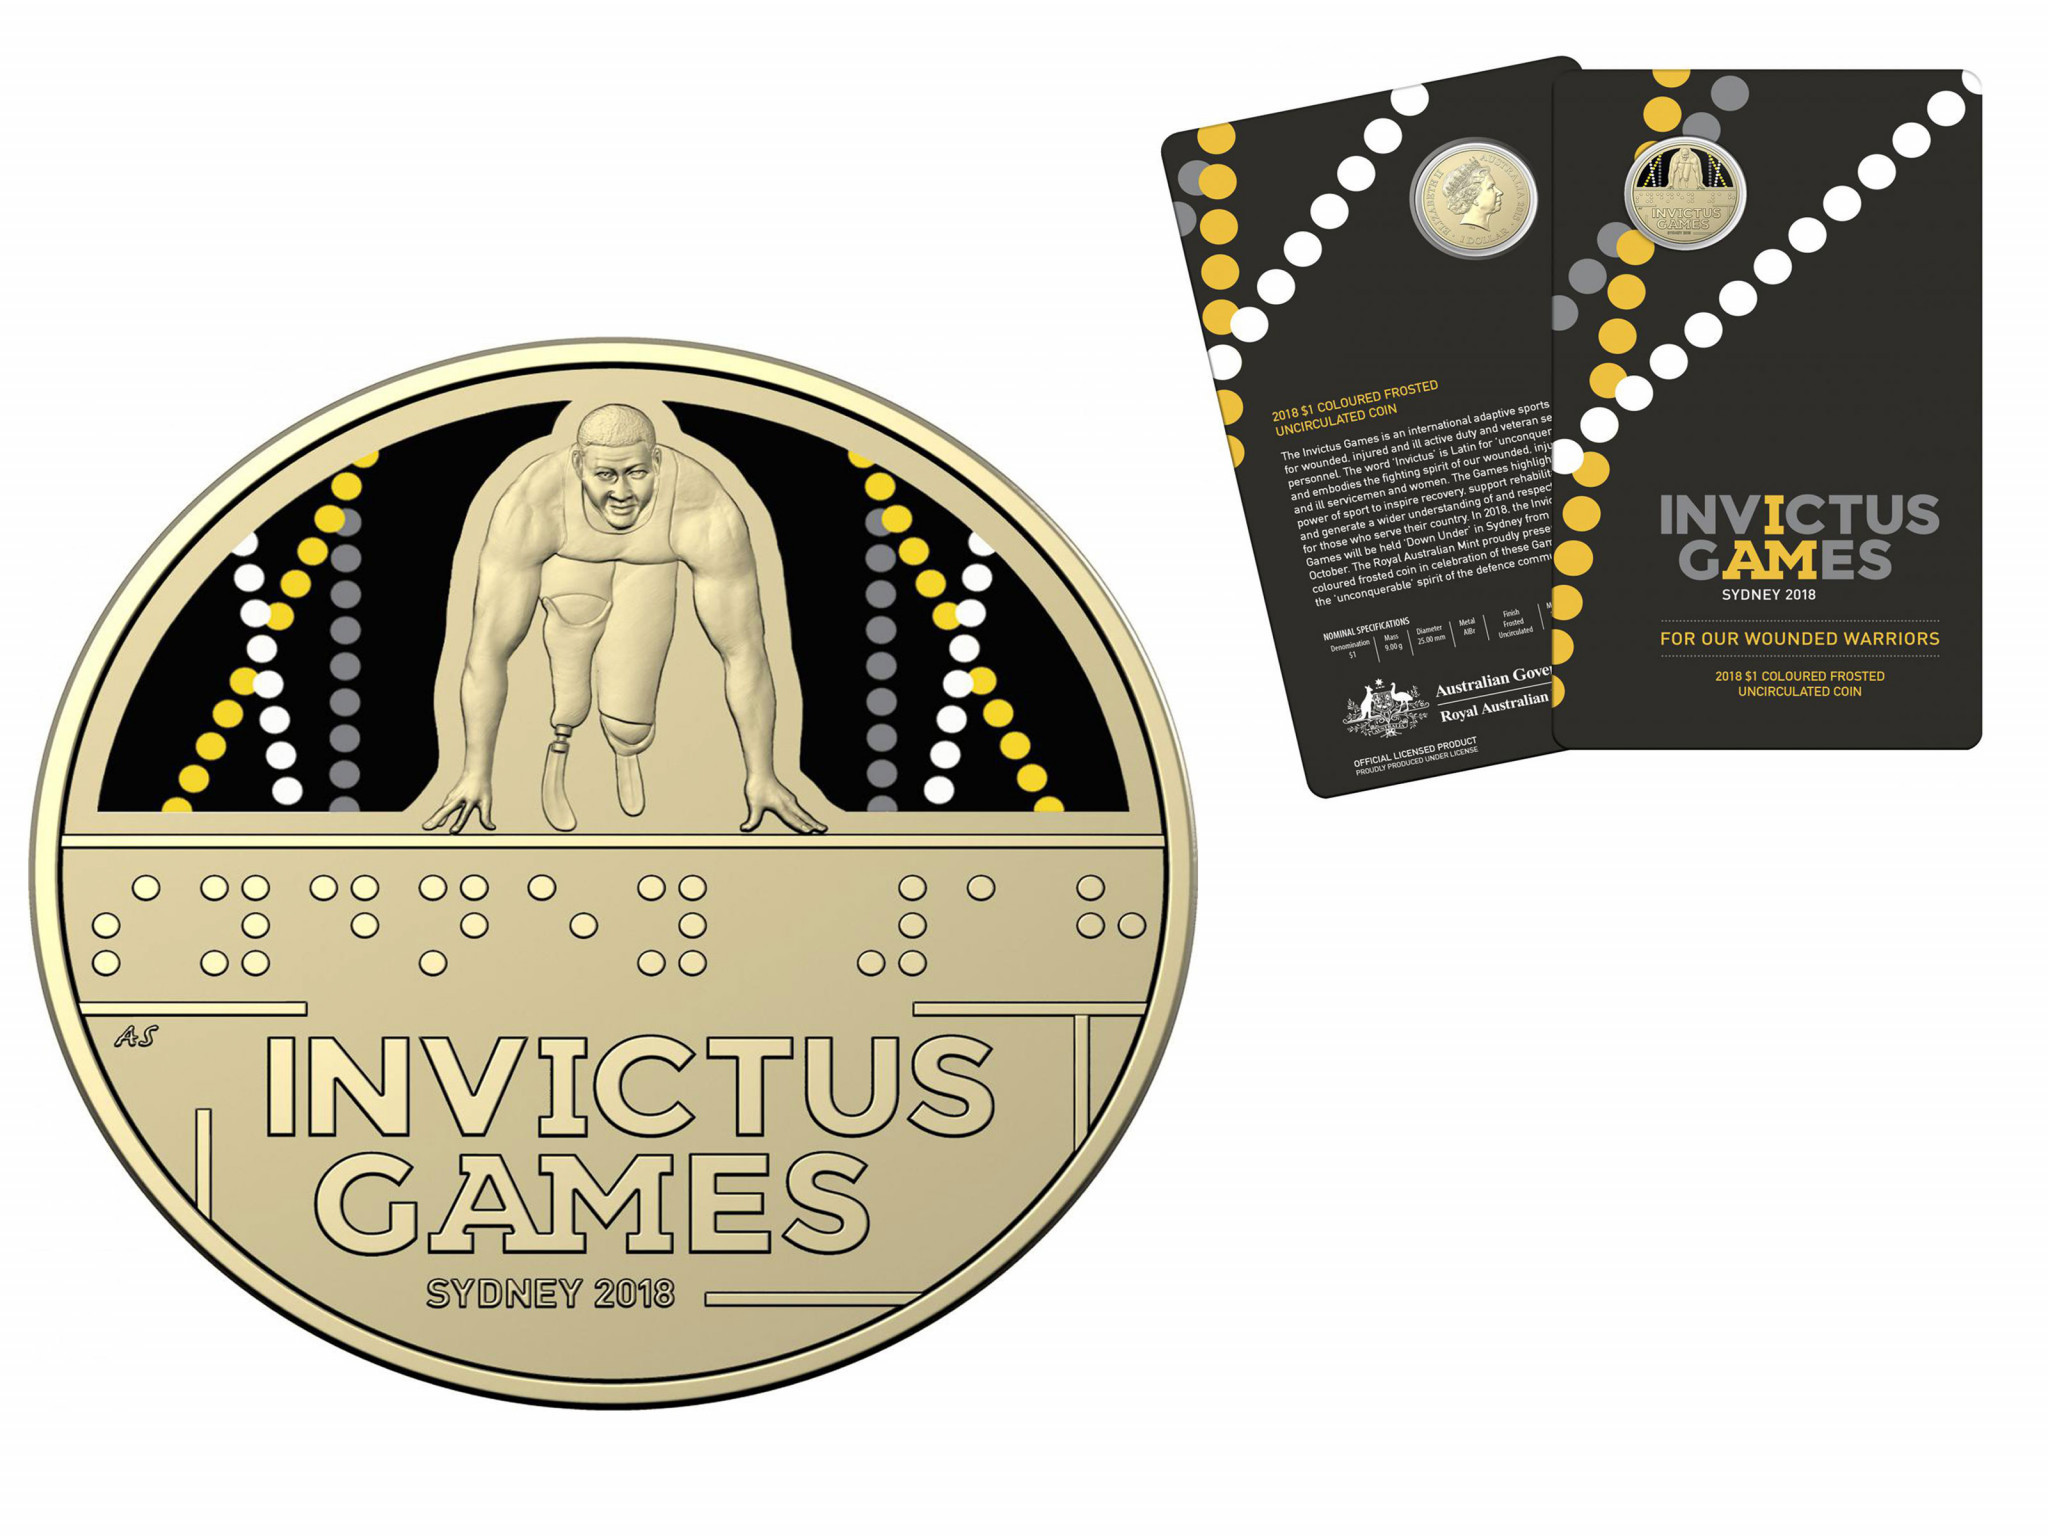 Royal Australian Mint has released 30,000 $1 coins which feature braille text spelling out 